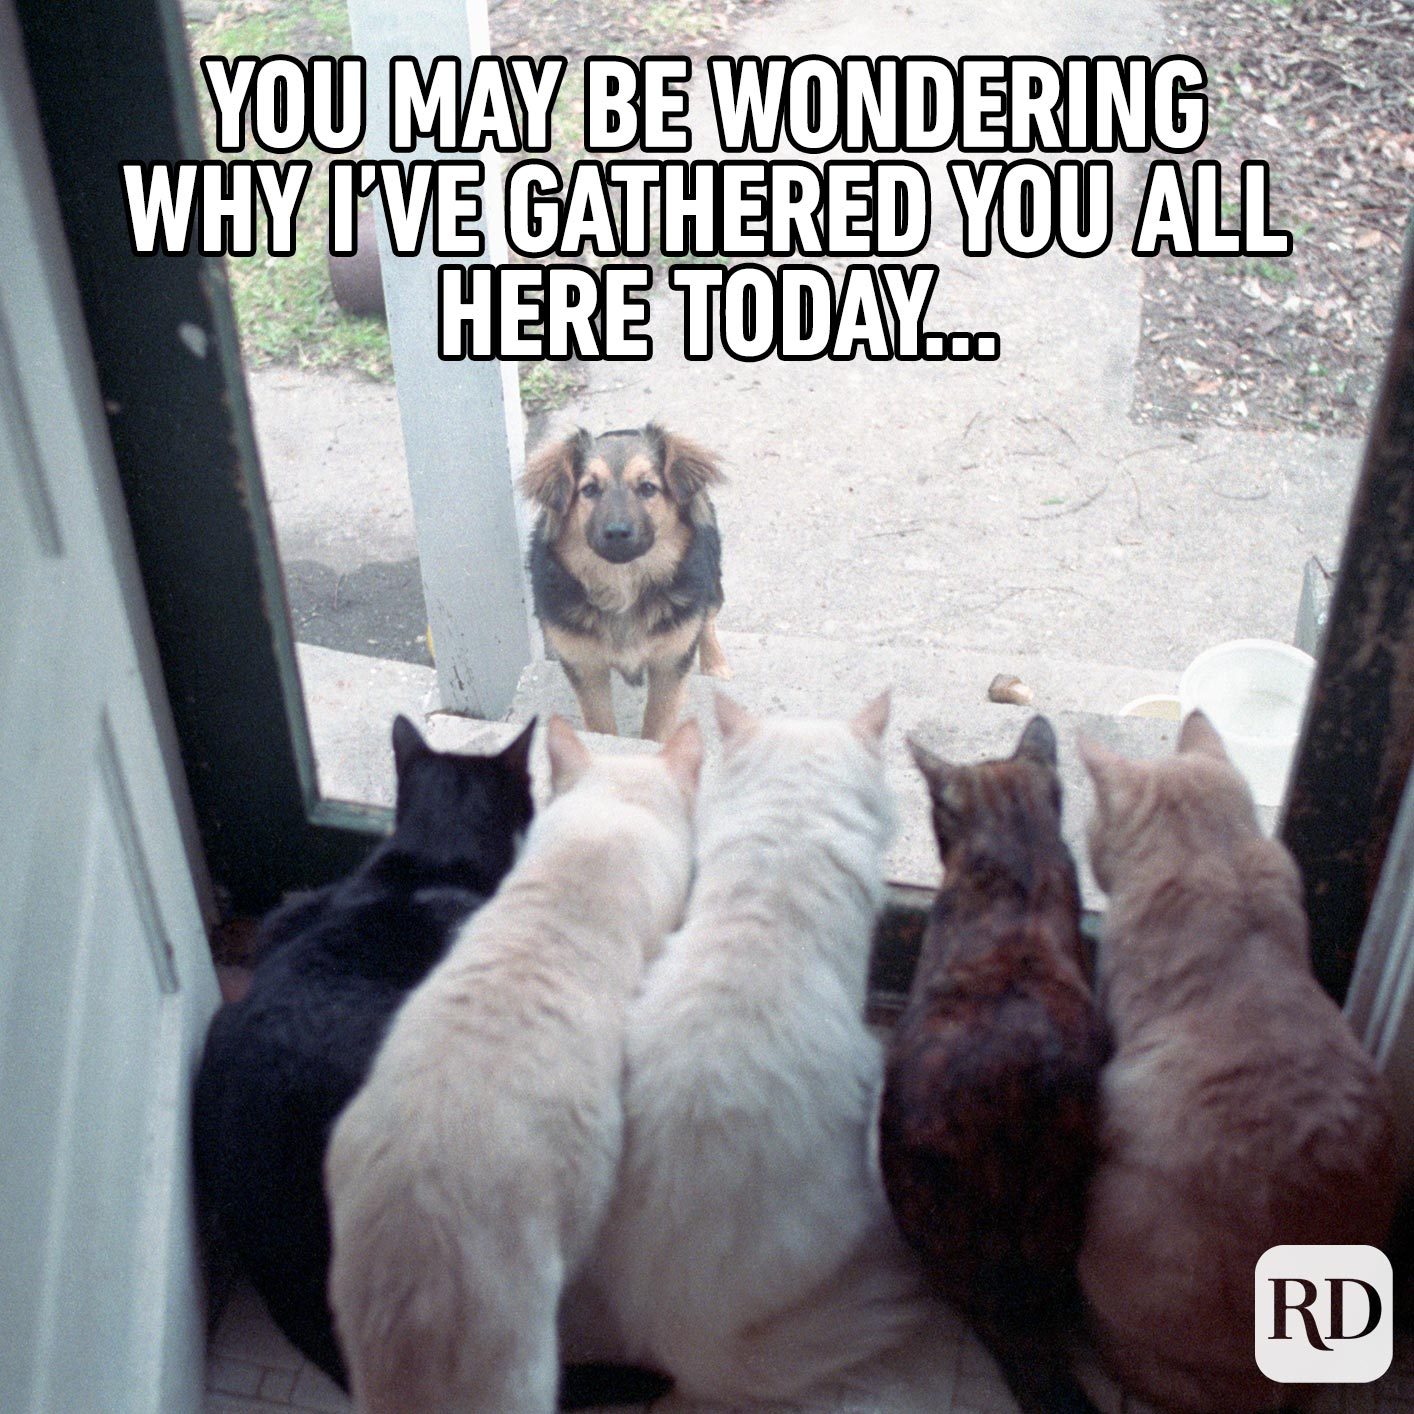 Dog outside door with line of cats before him. Meme text: You may be wondering why I've gathered you all here today…